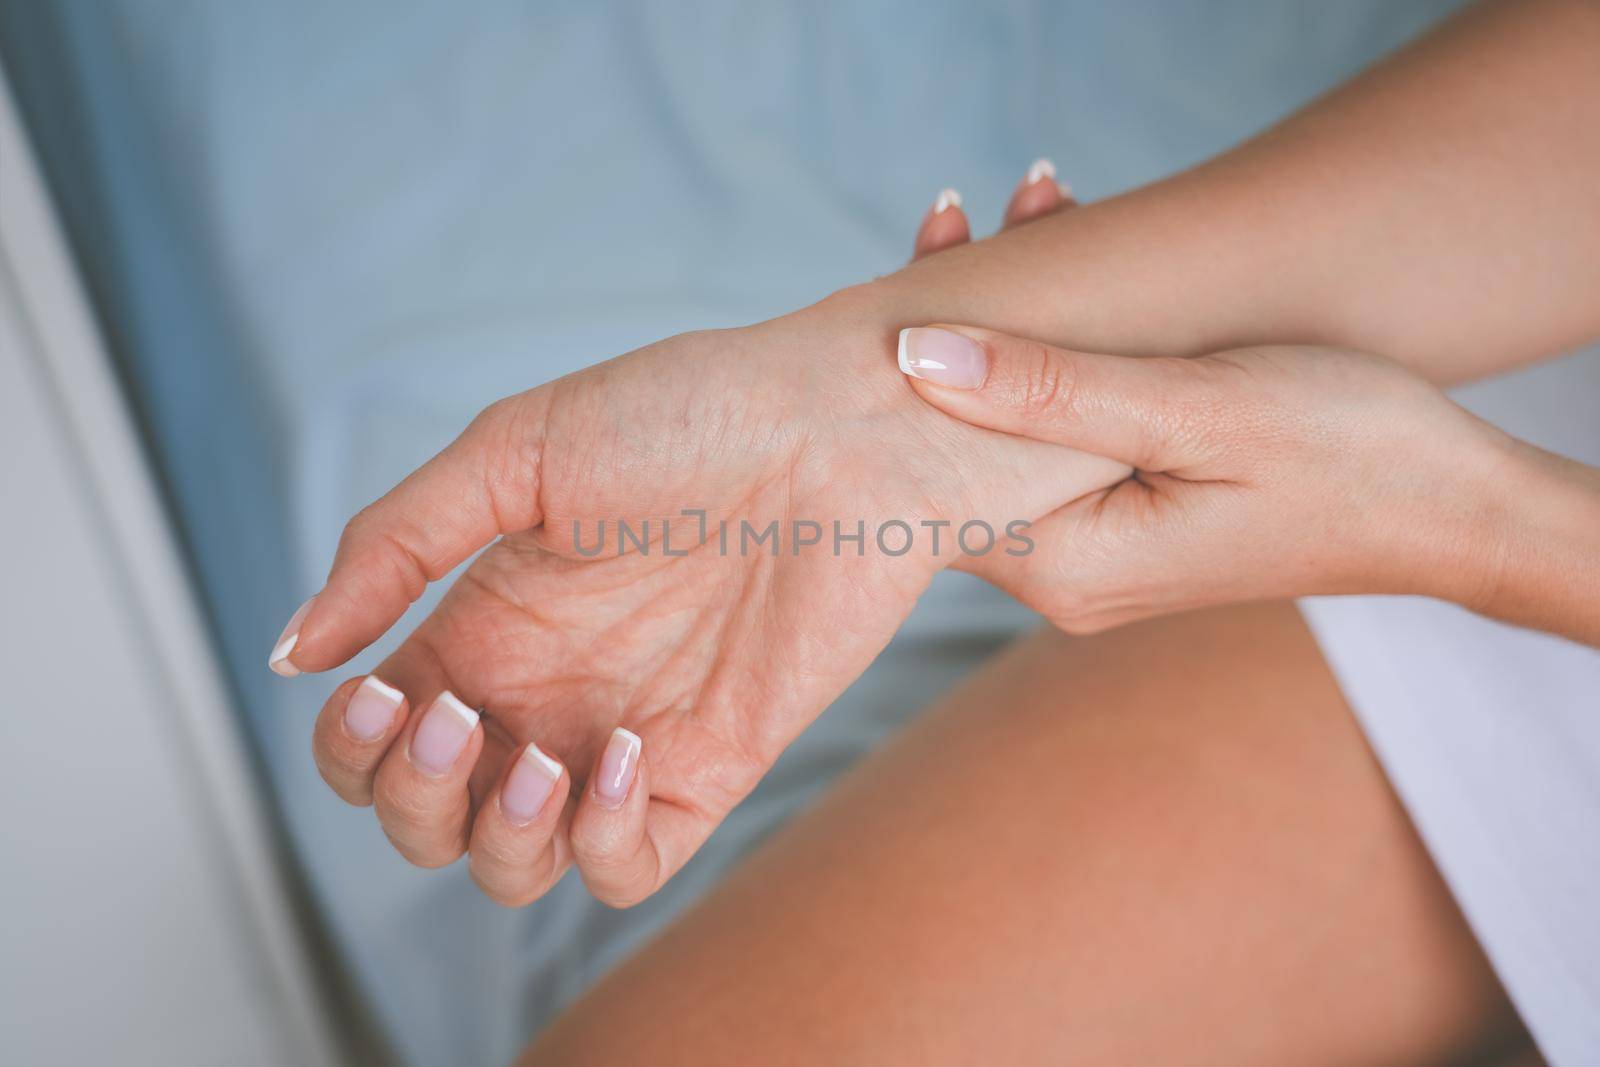 Woman massaging wrist or hand with carpal tunnel syndrome and numbness. High quality photo